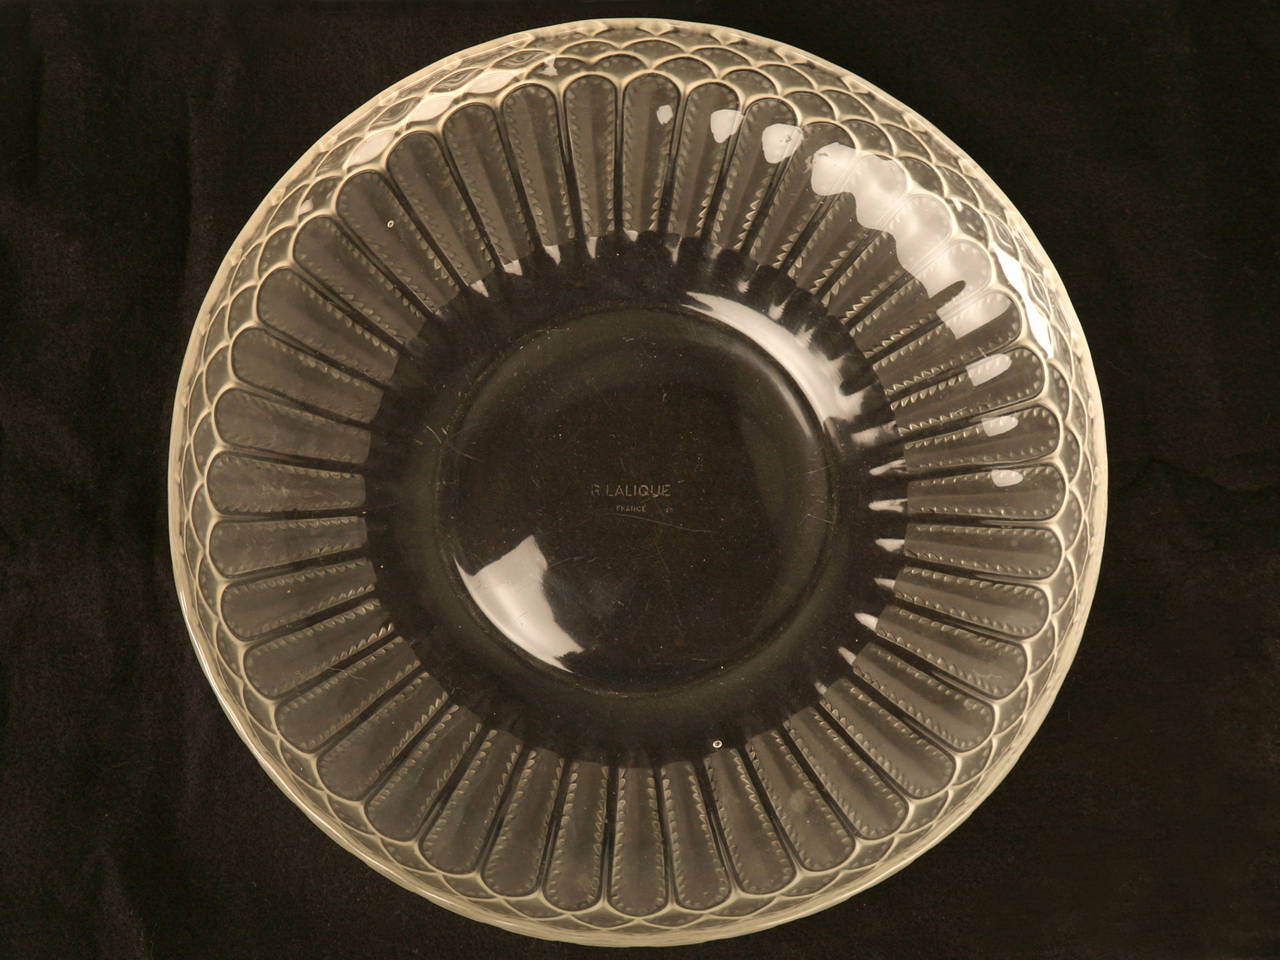 R. Lalique Jaffa bowl with abstract, or stylized floral decoration radiating from a clear center section, circa 1932. Please note the fine light scratches. There have been no repairs, nor are there any cracks.